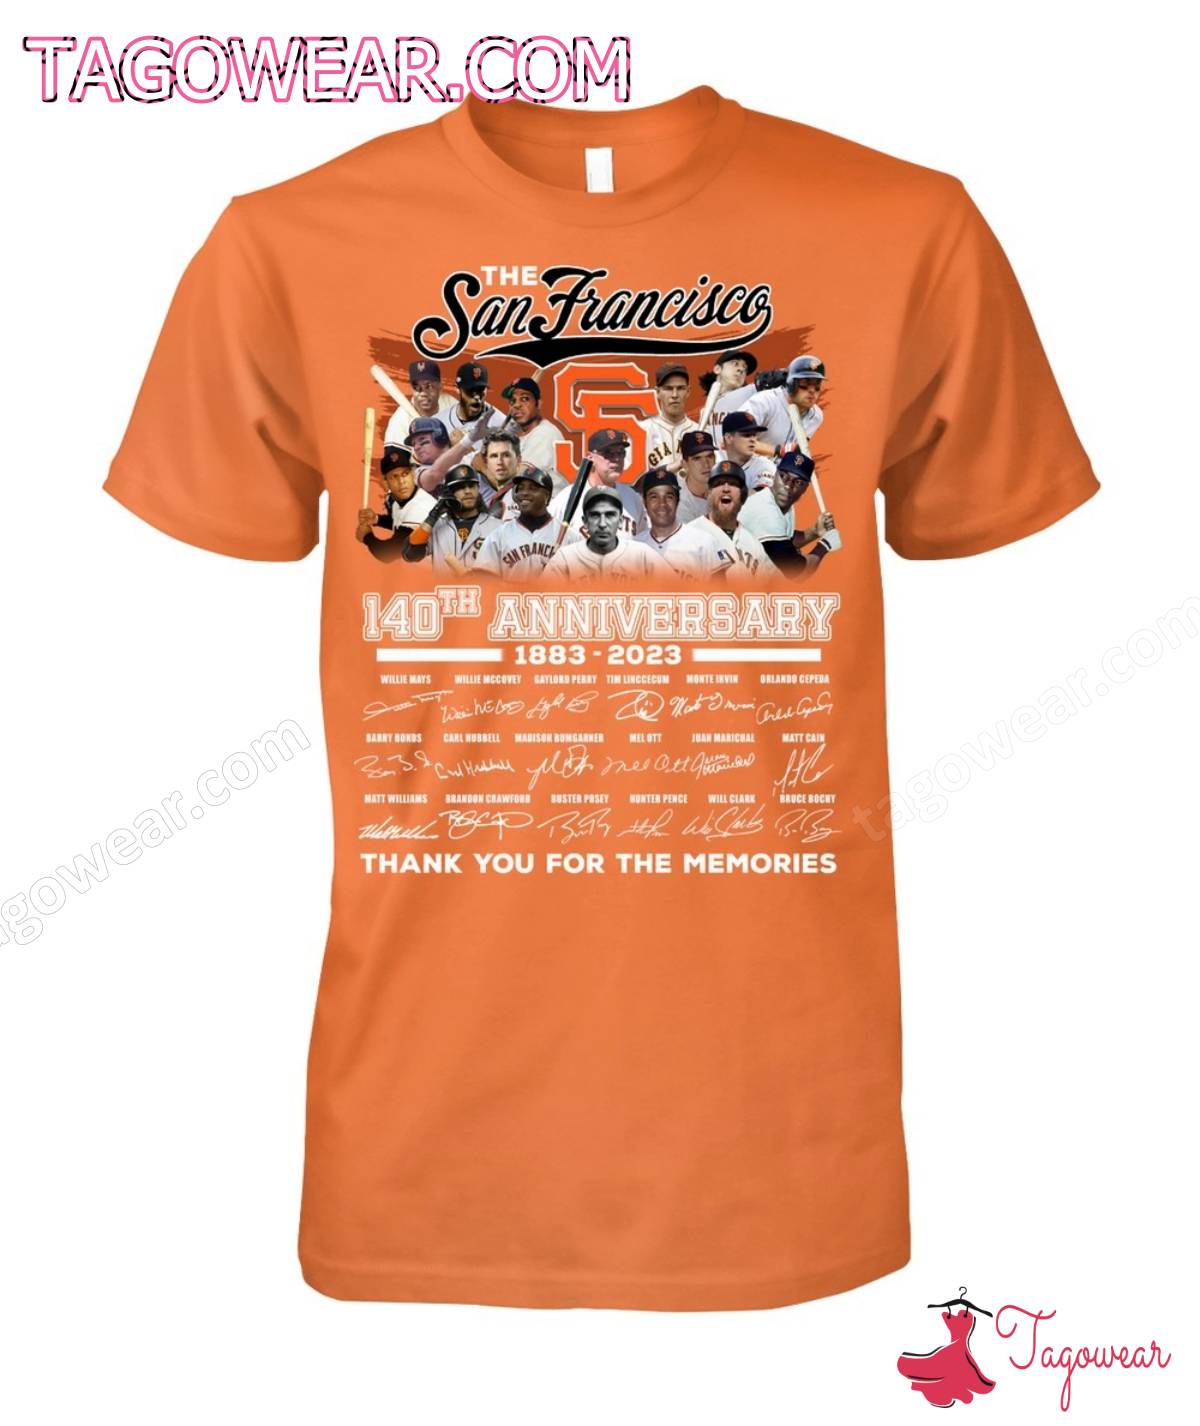 The San Francisco Giants 140th Anniversary 1883-2023 Thank You For The Memories Signatures Shirt a